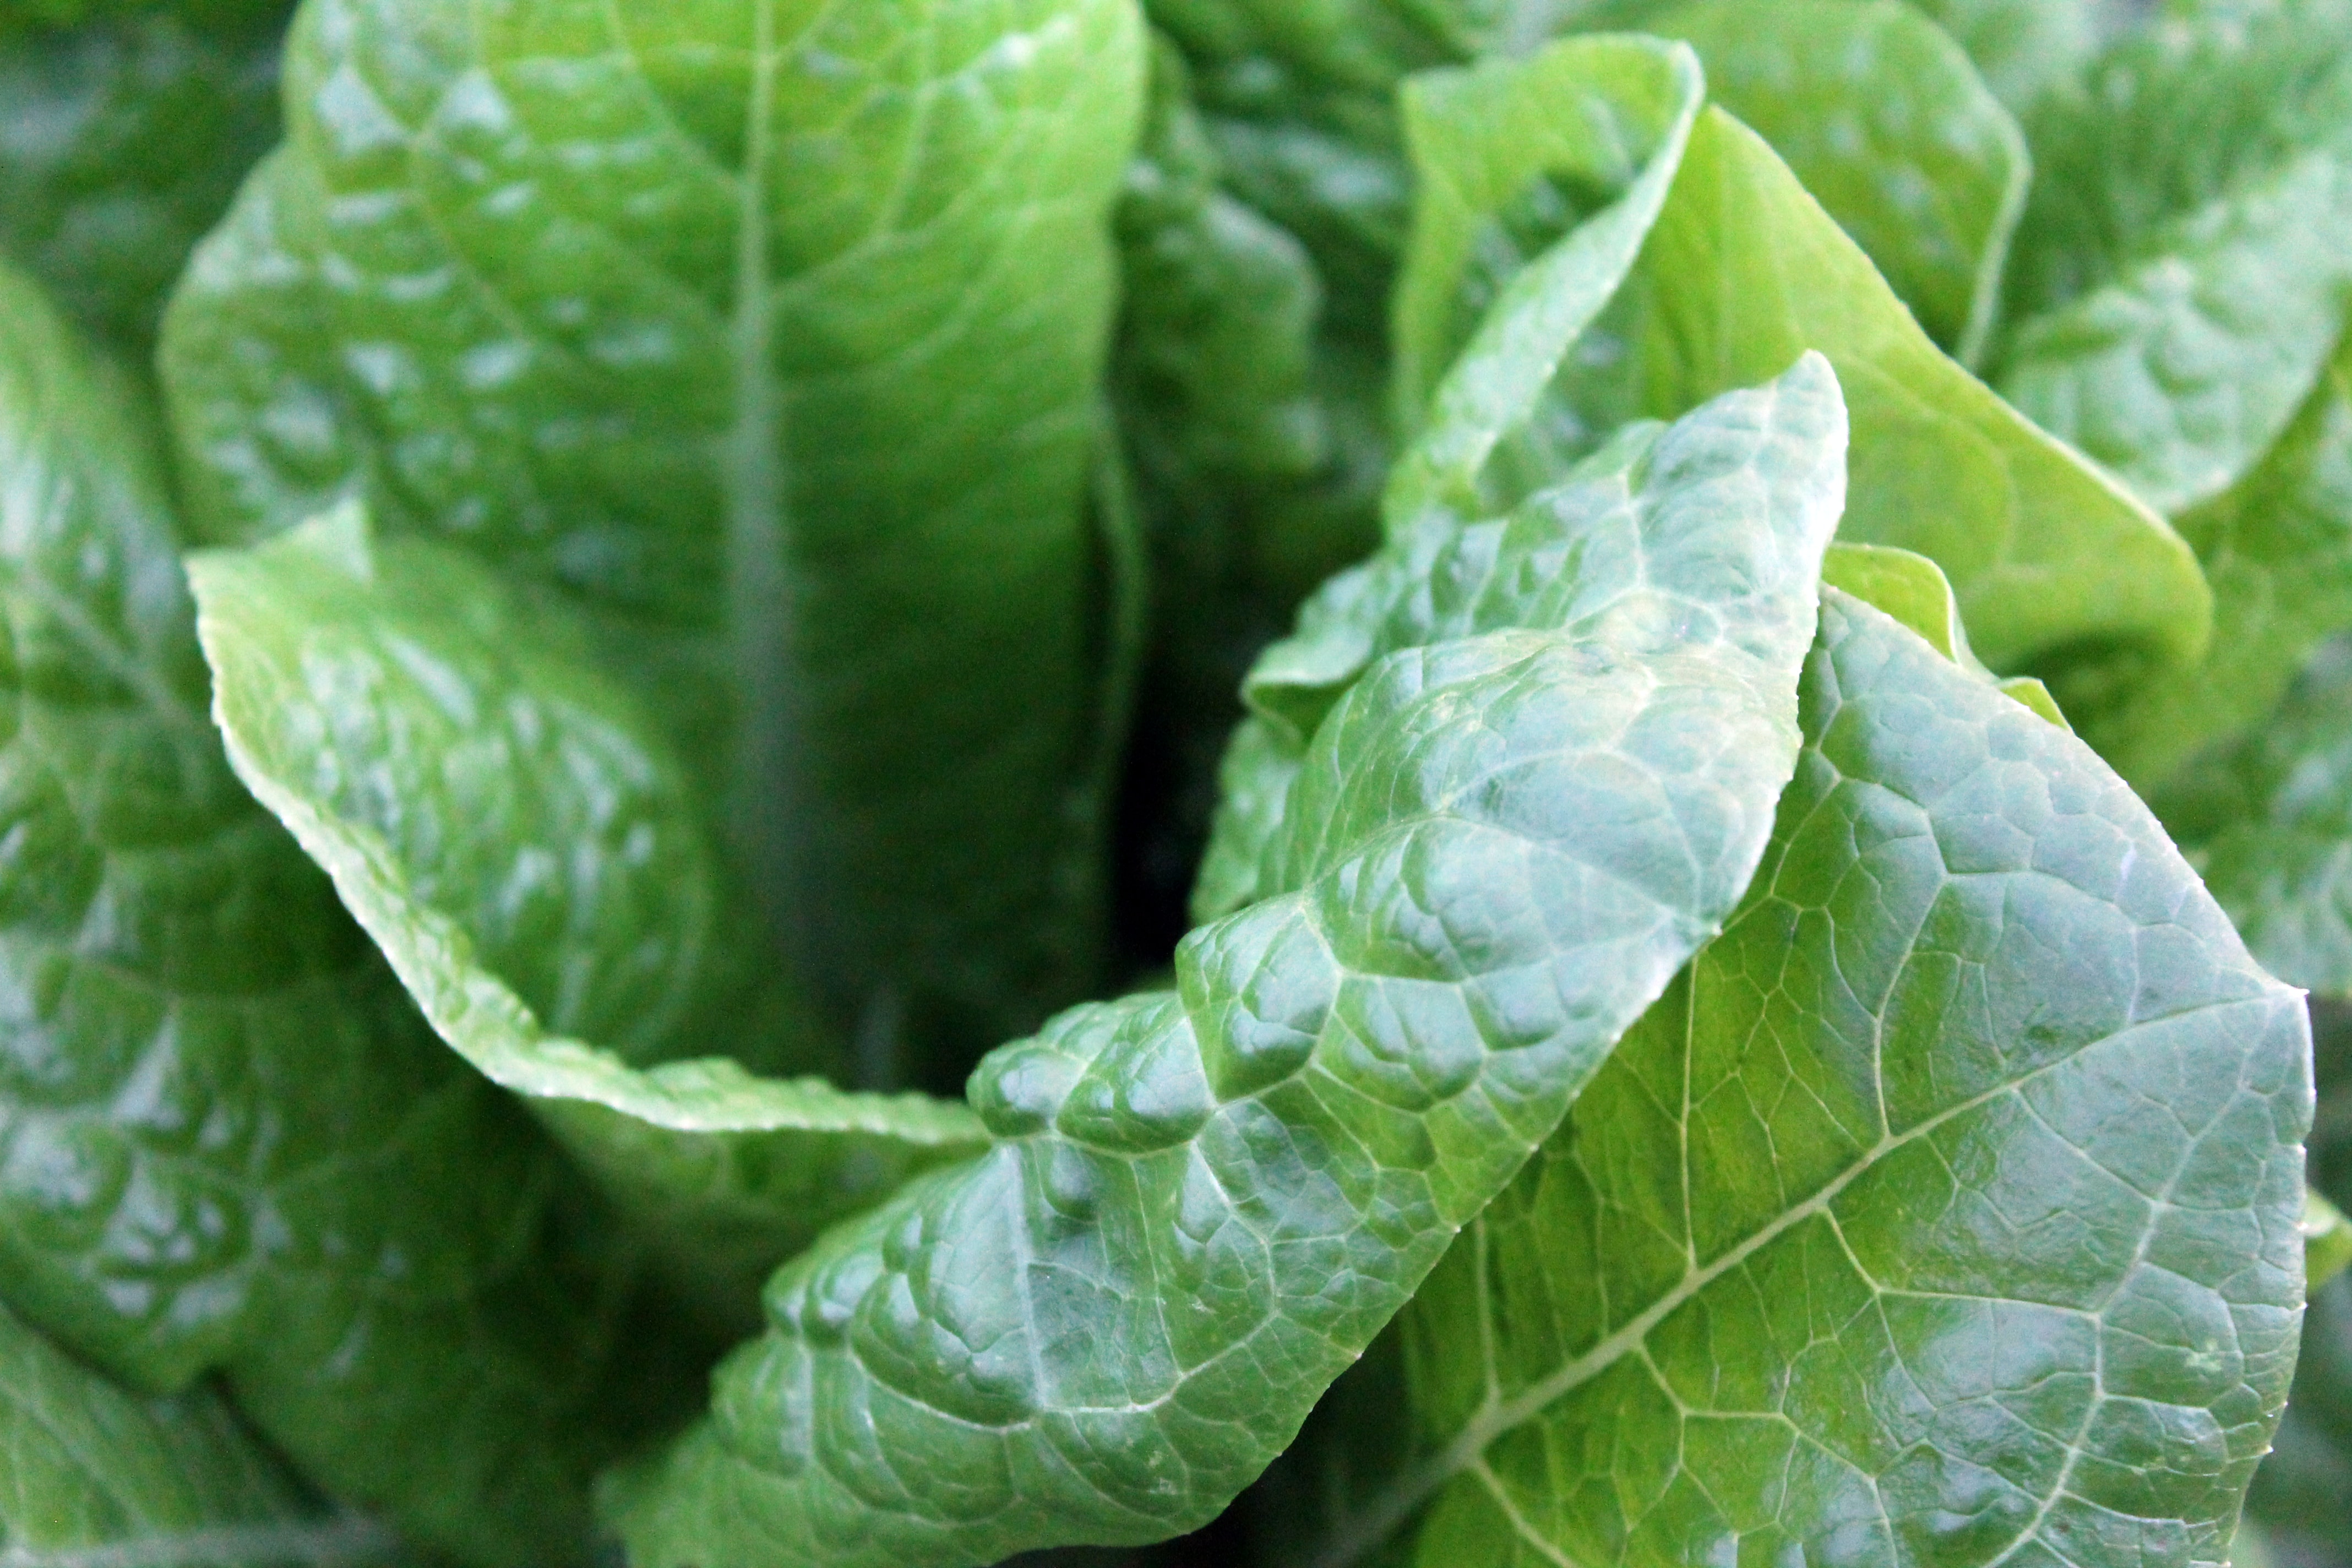 Close up image of lettuce